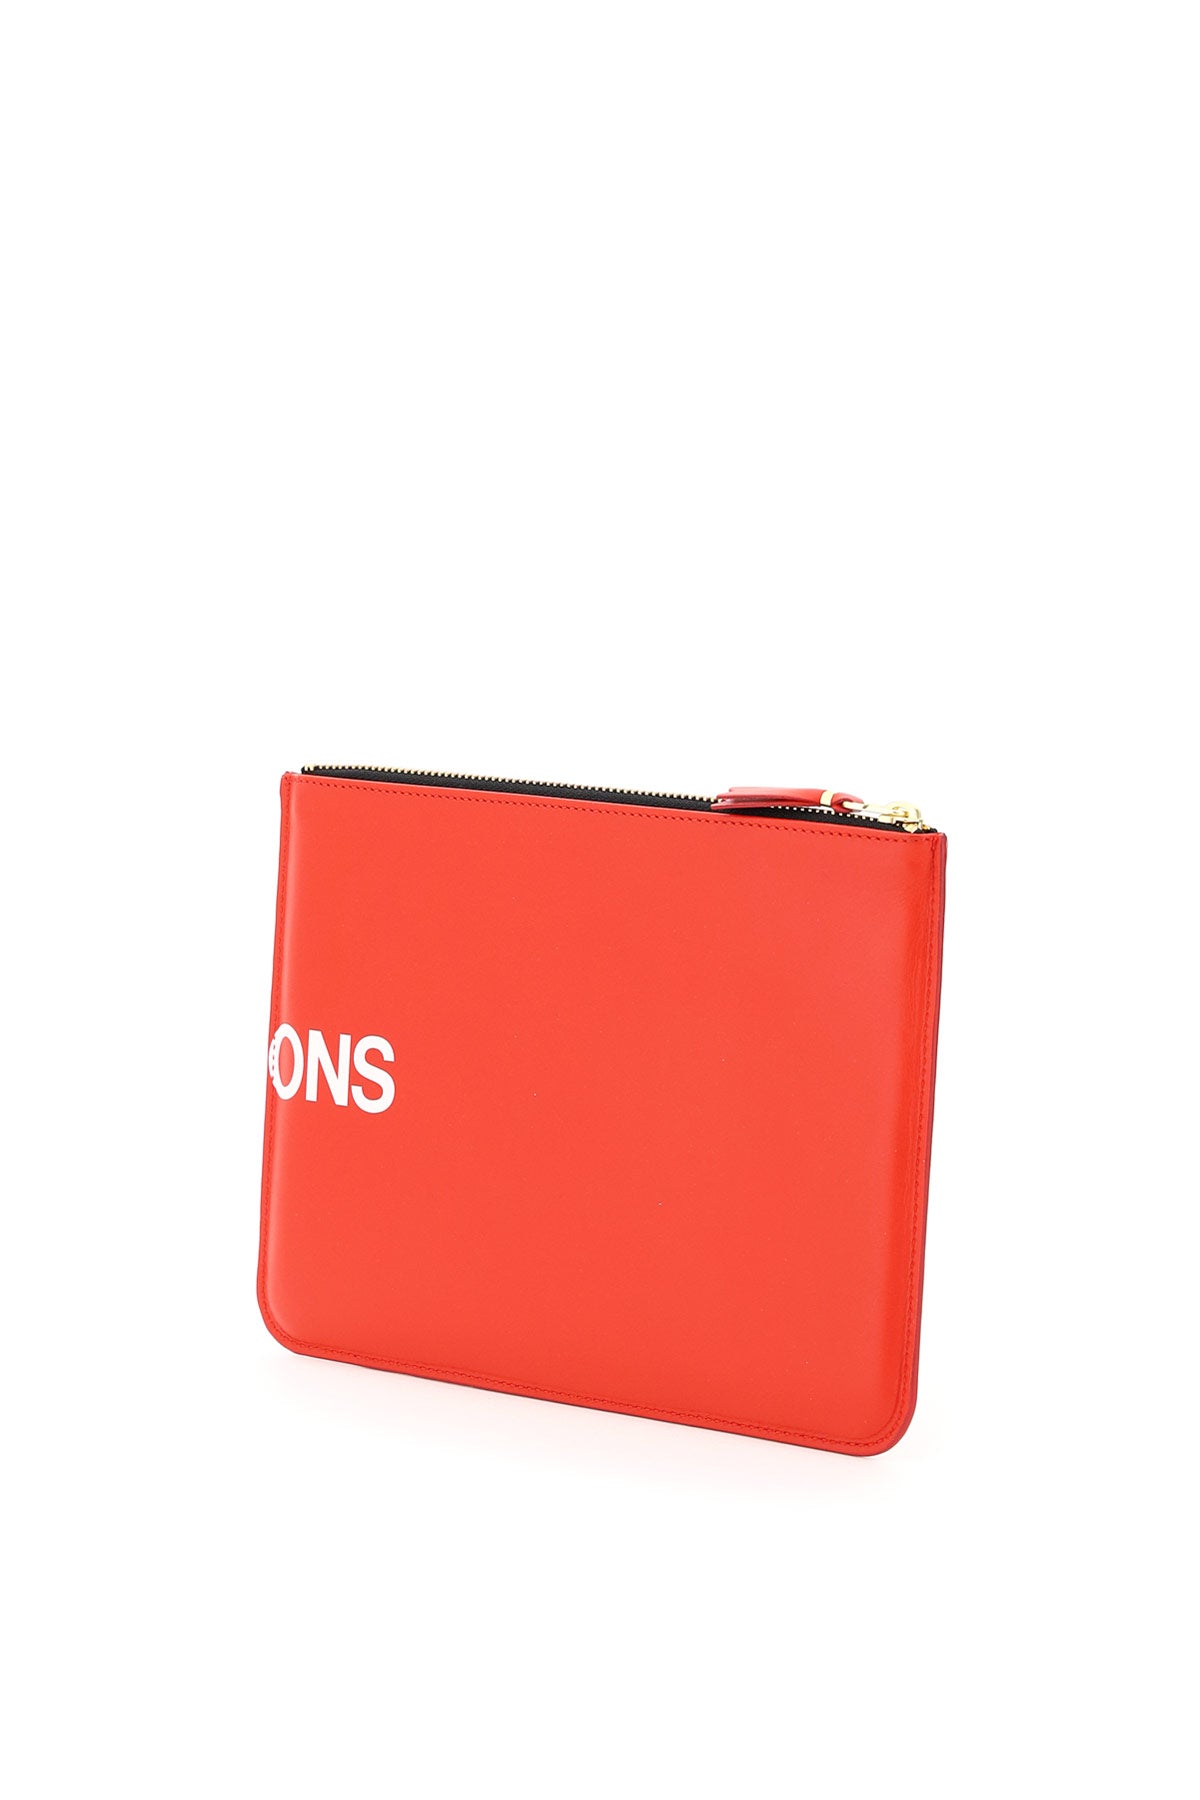 Comme Des Garcons Wallet Comme des garcons wallet leather pouch with logo